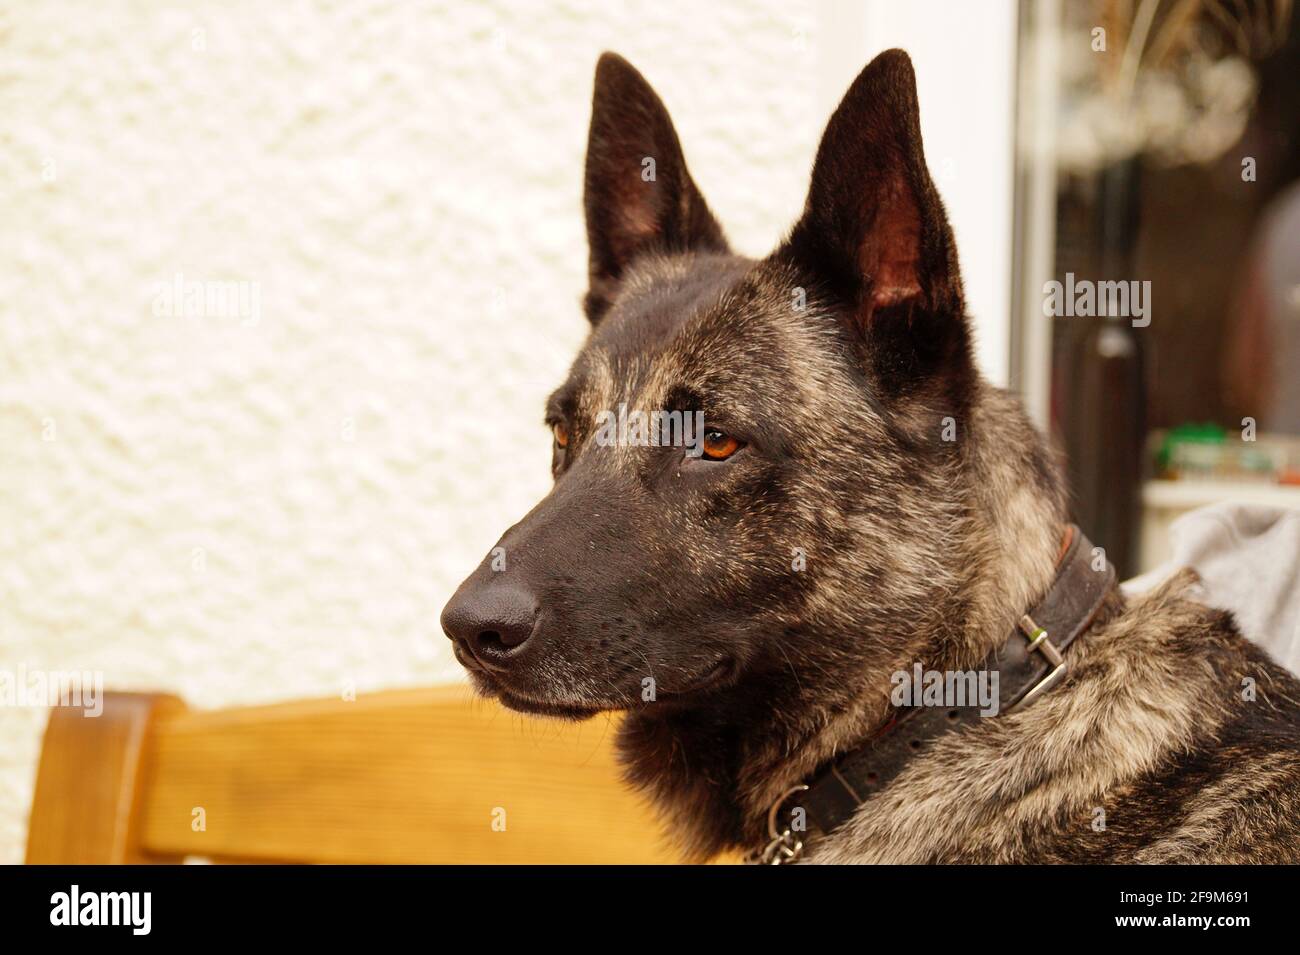 Dutch Shepherd Dog with serious expression looking away from camera Stock Photo